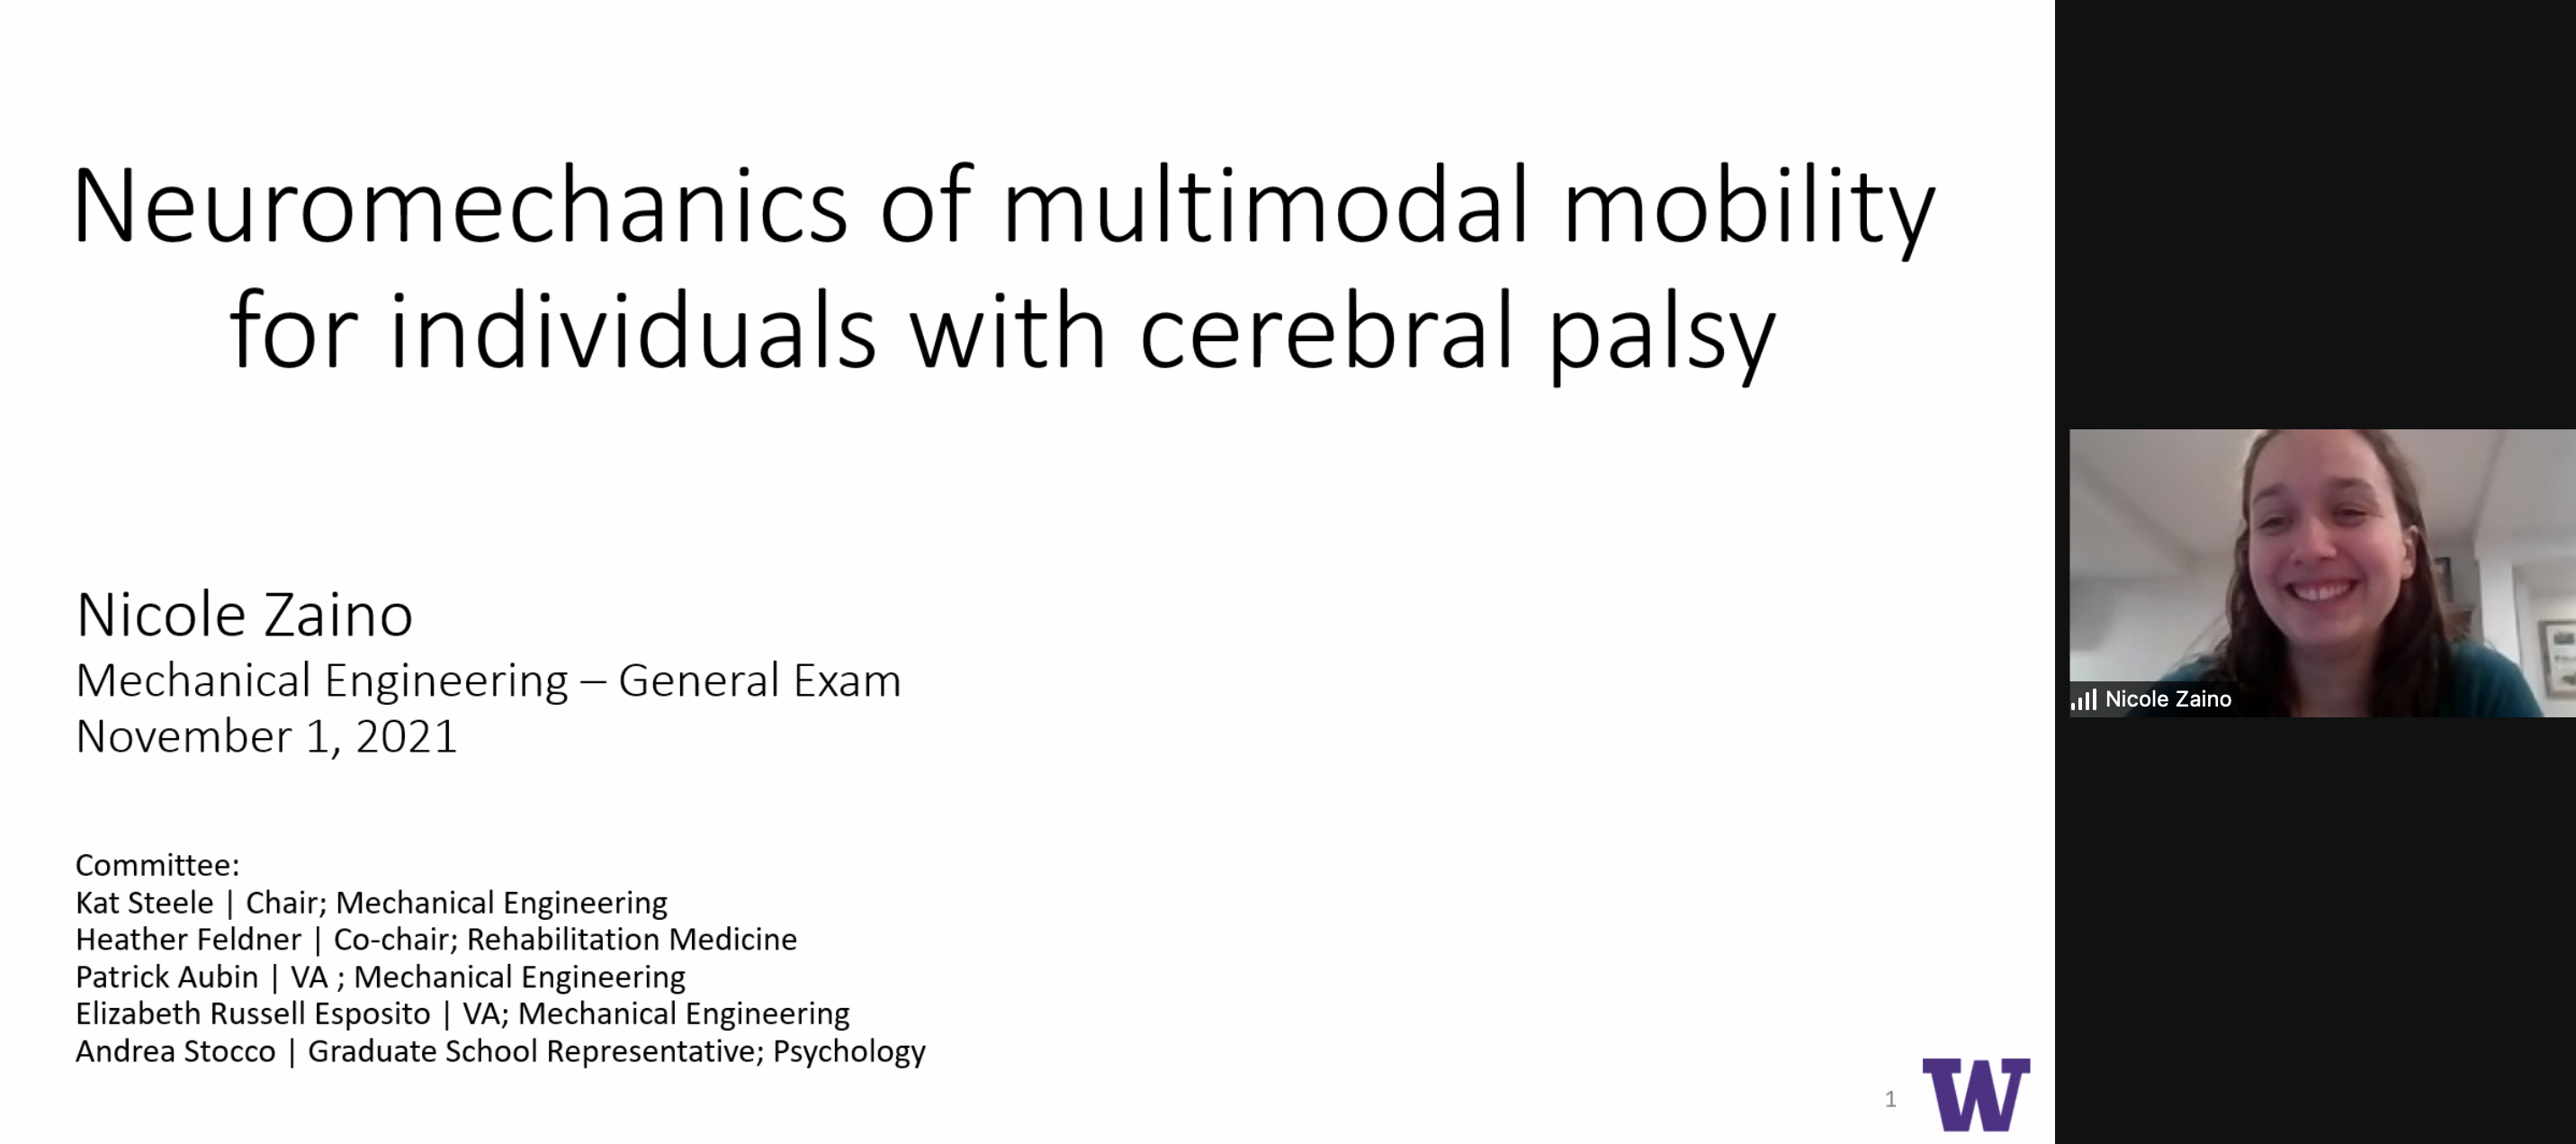 A screenshot of a zoom meeting with a powerpoint slide titled "Neuromechanics of multimodal mobility for individuals with cerebral palsy" with a camera view of Nicole on the right side of the screen